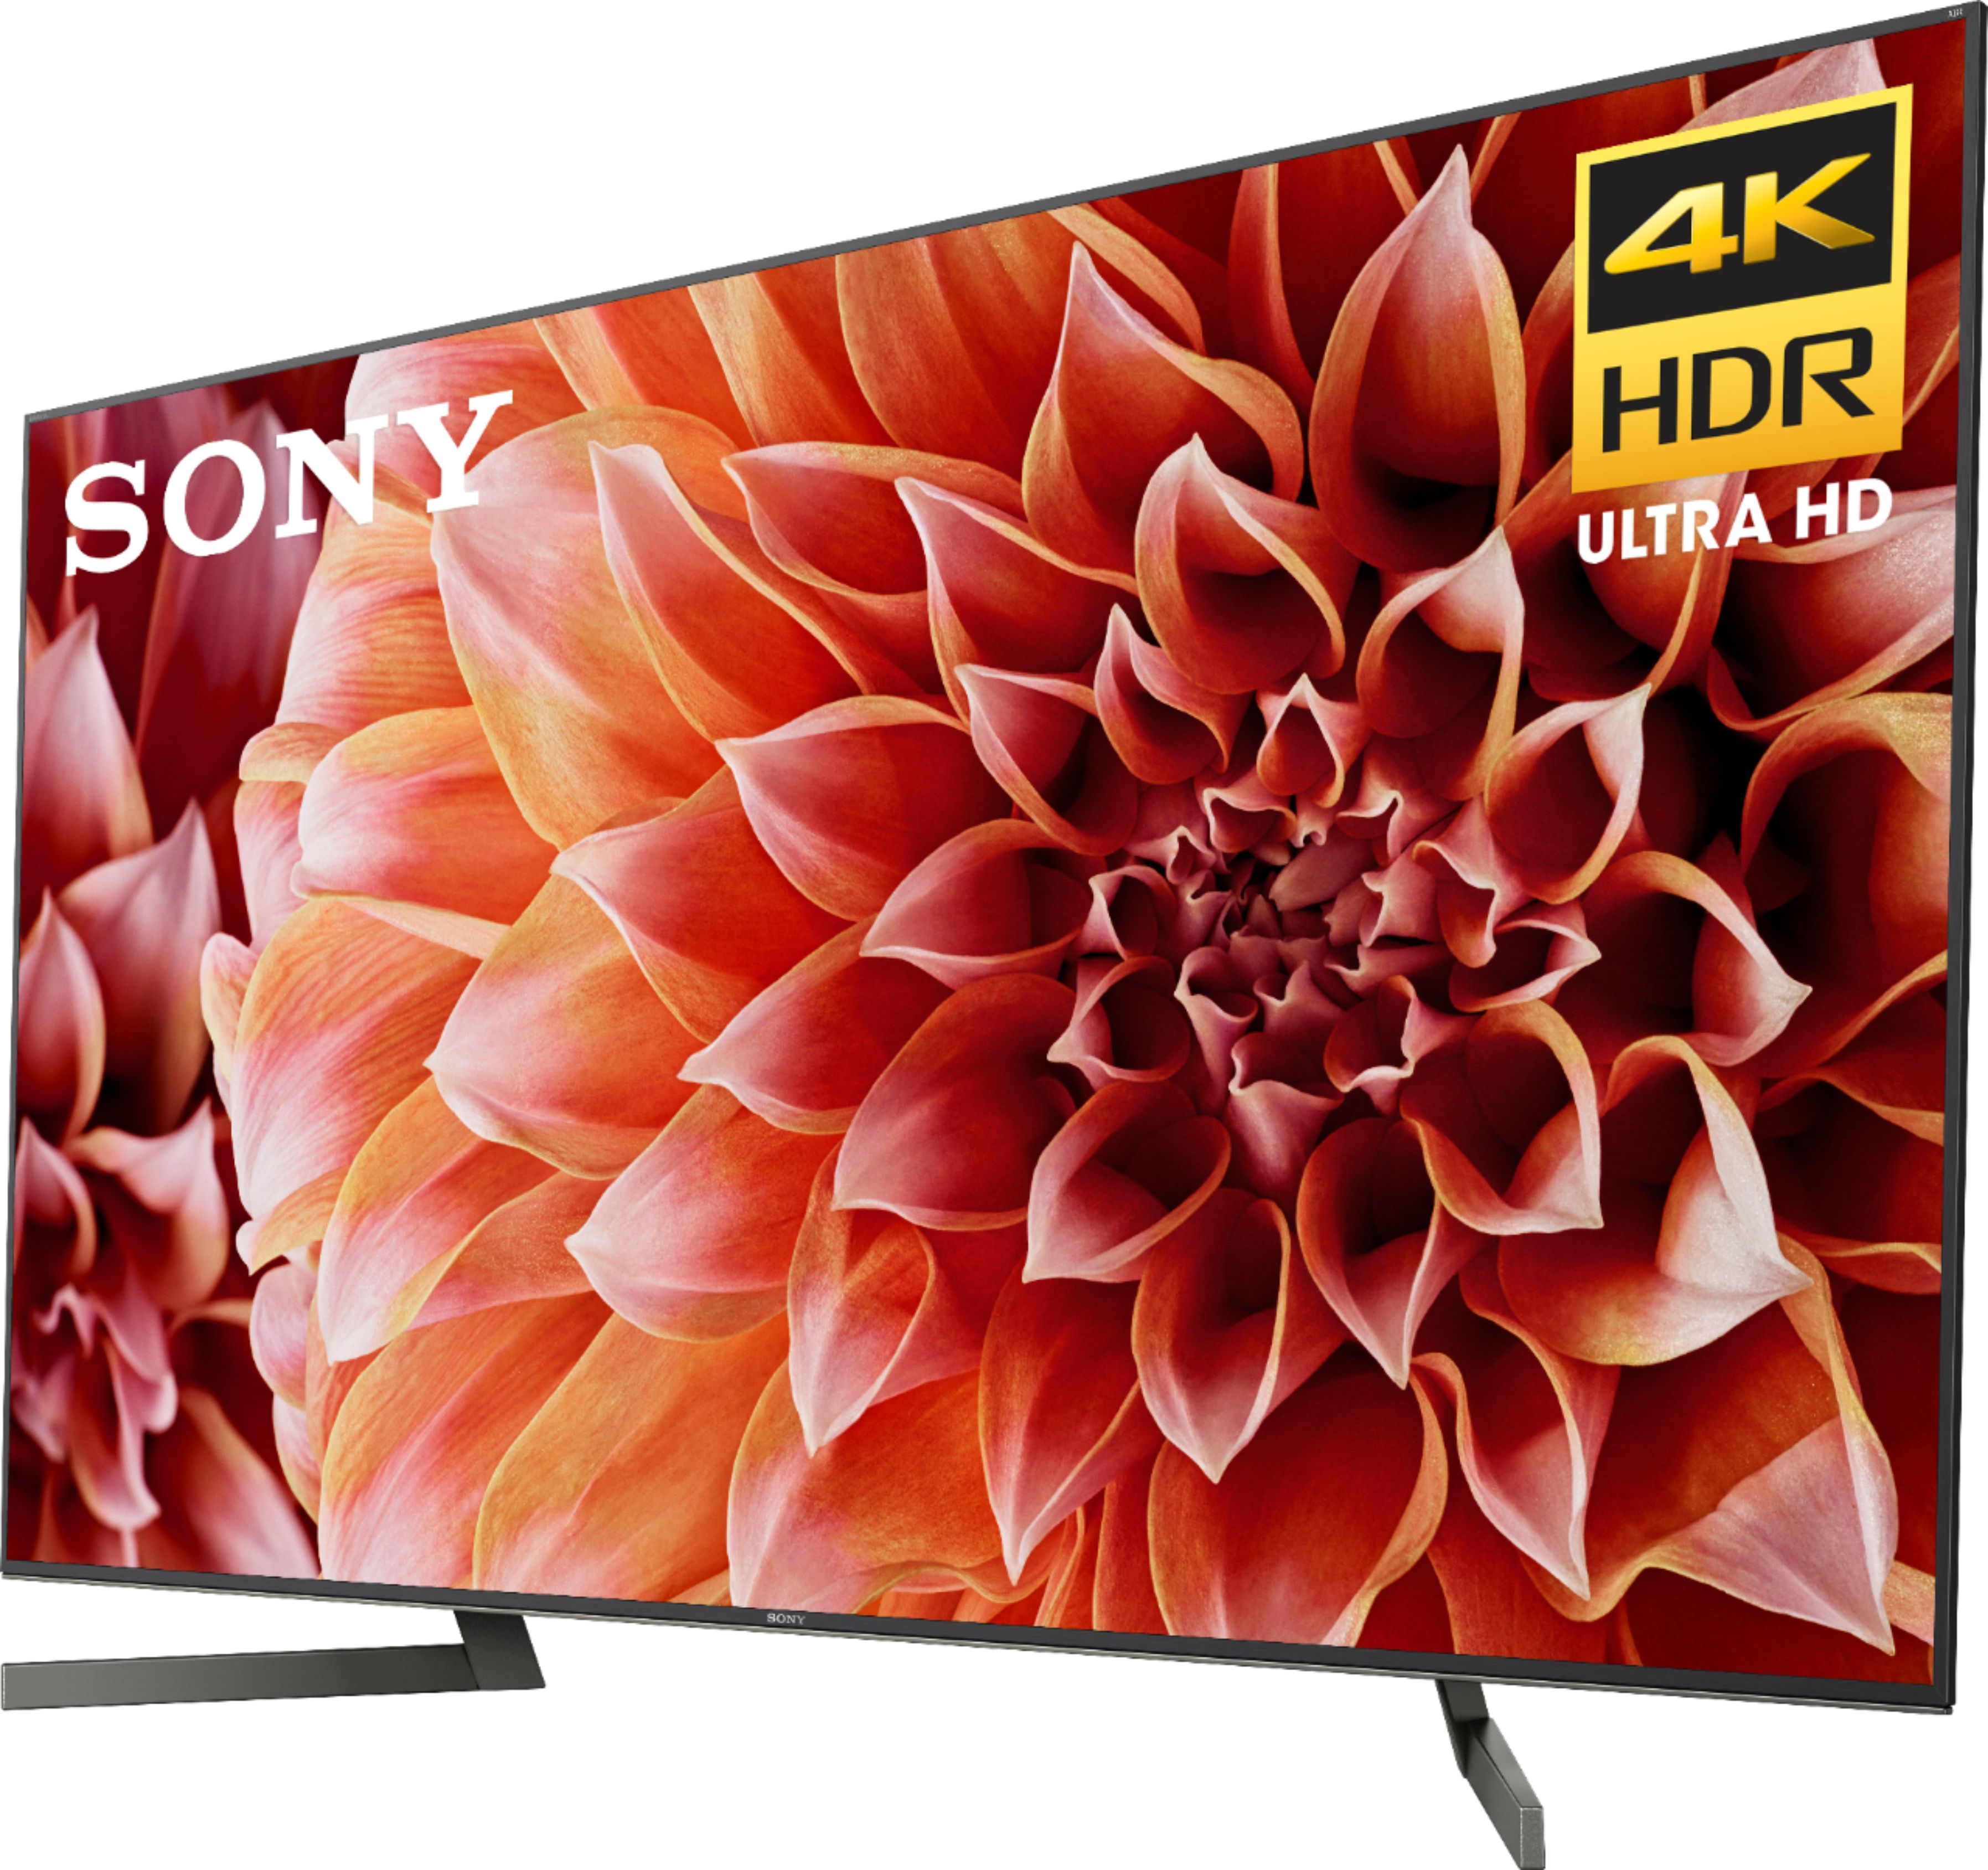 Sony 55" Class – Led – X900f Series – 2160p – Smart – 4k Ultra Hd Tv Regarding Lauderdale 62 Inch Tv Stands (View 21 of 30)